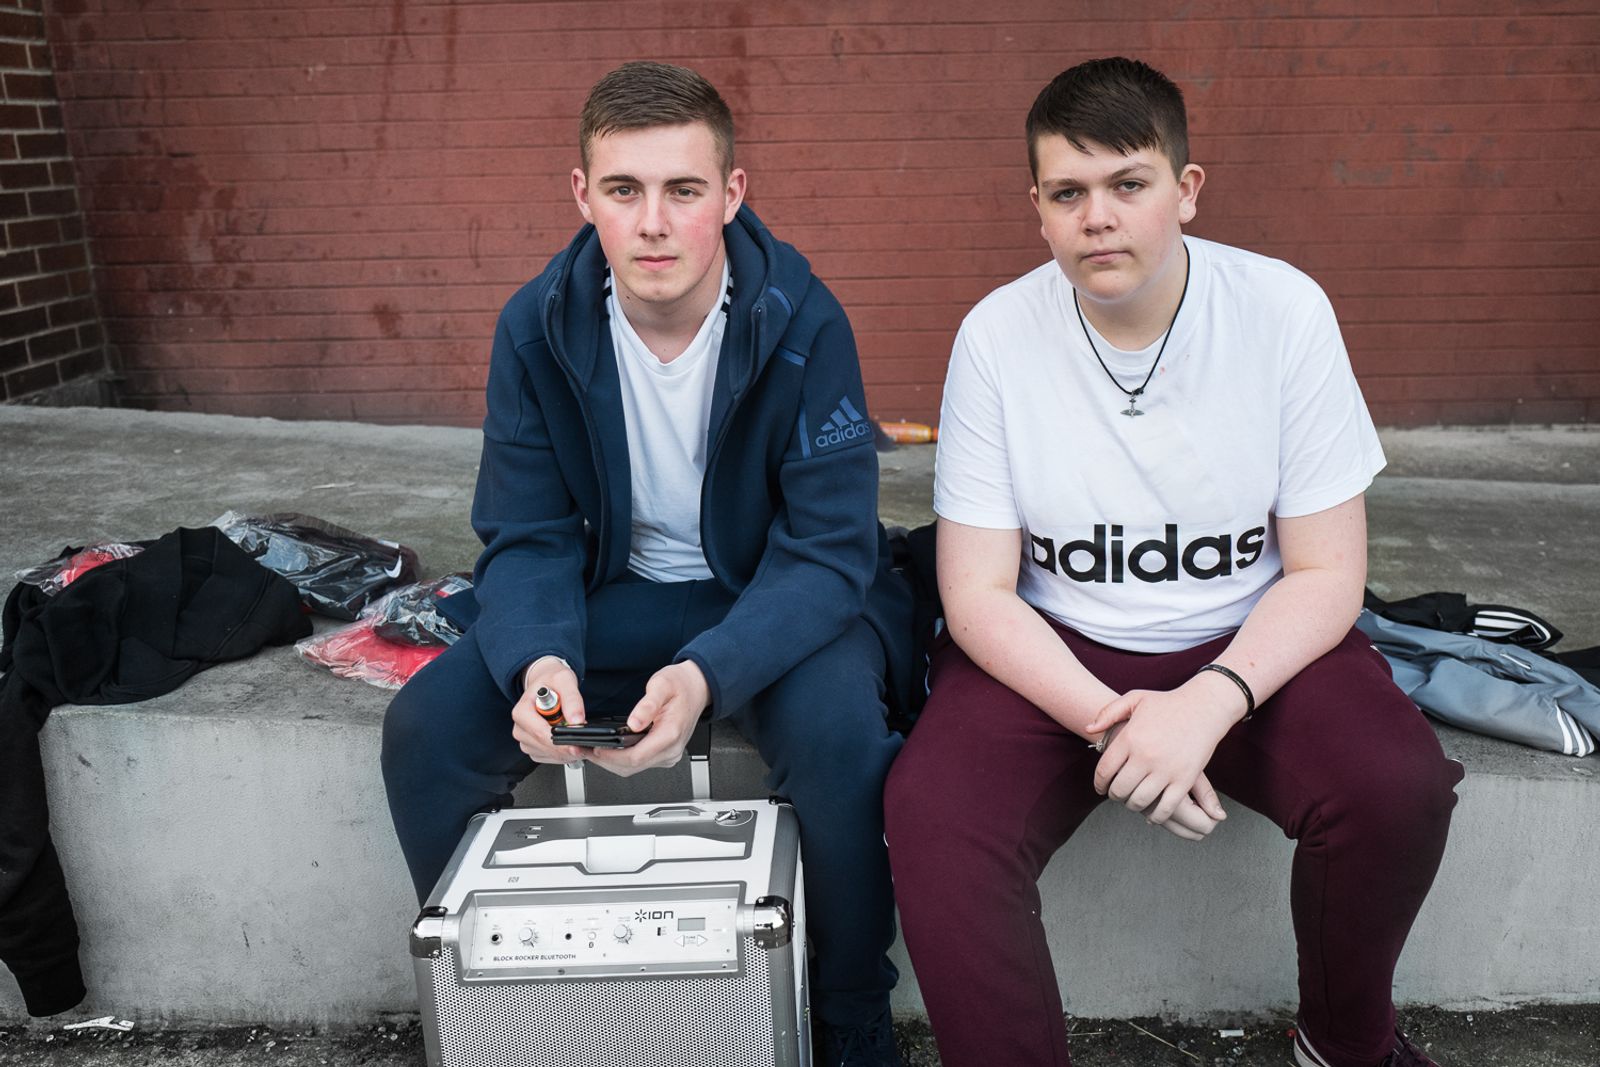 © Marika Dee - Image from the Belfast: Being Young in a Divided City photography project